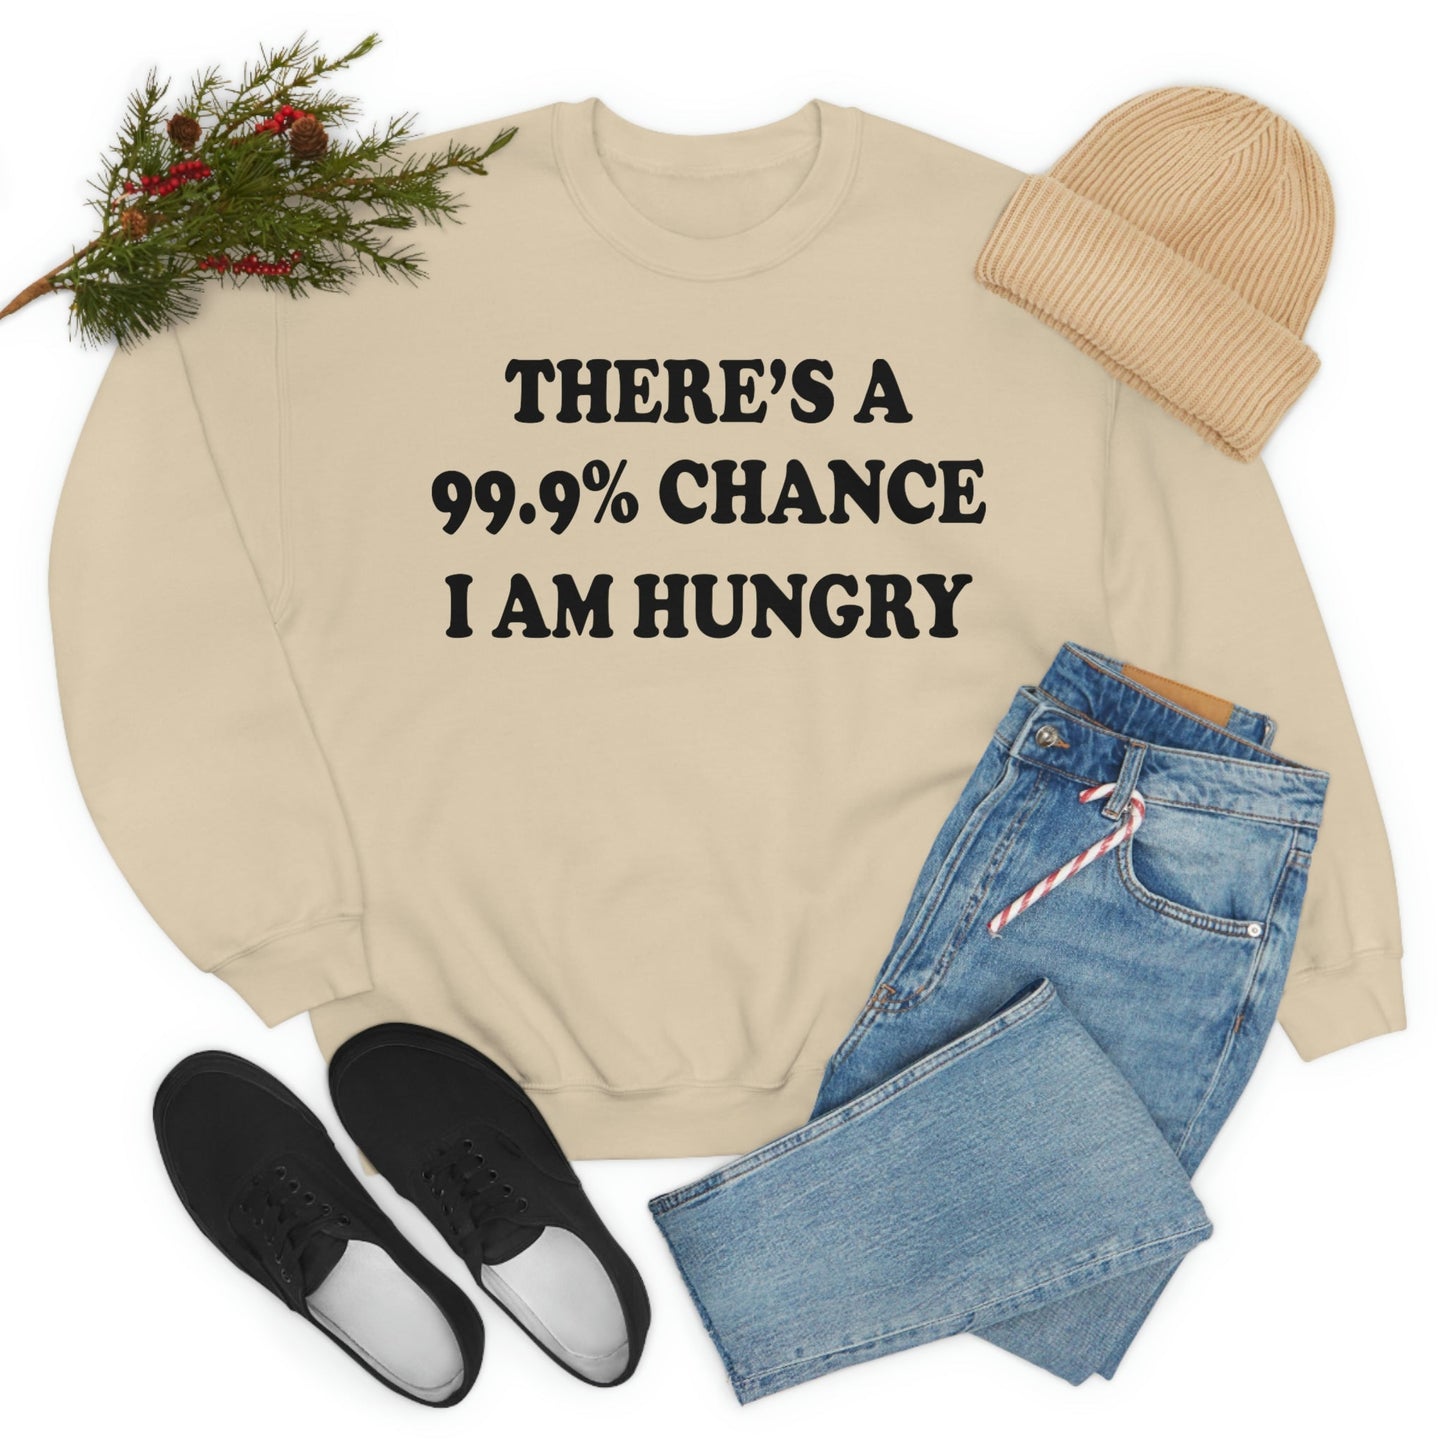 Theres a 99.9% Chance I Am Hungry